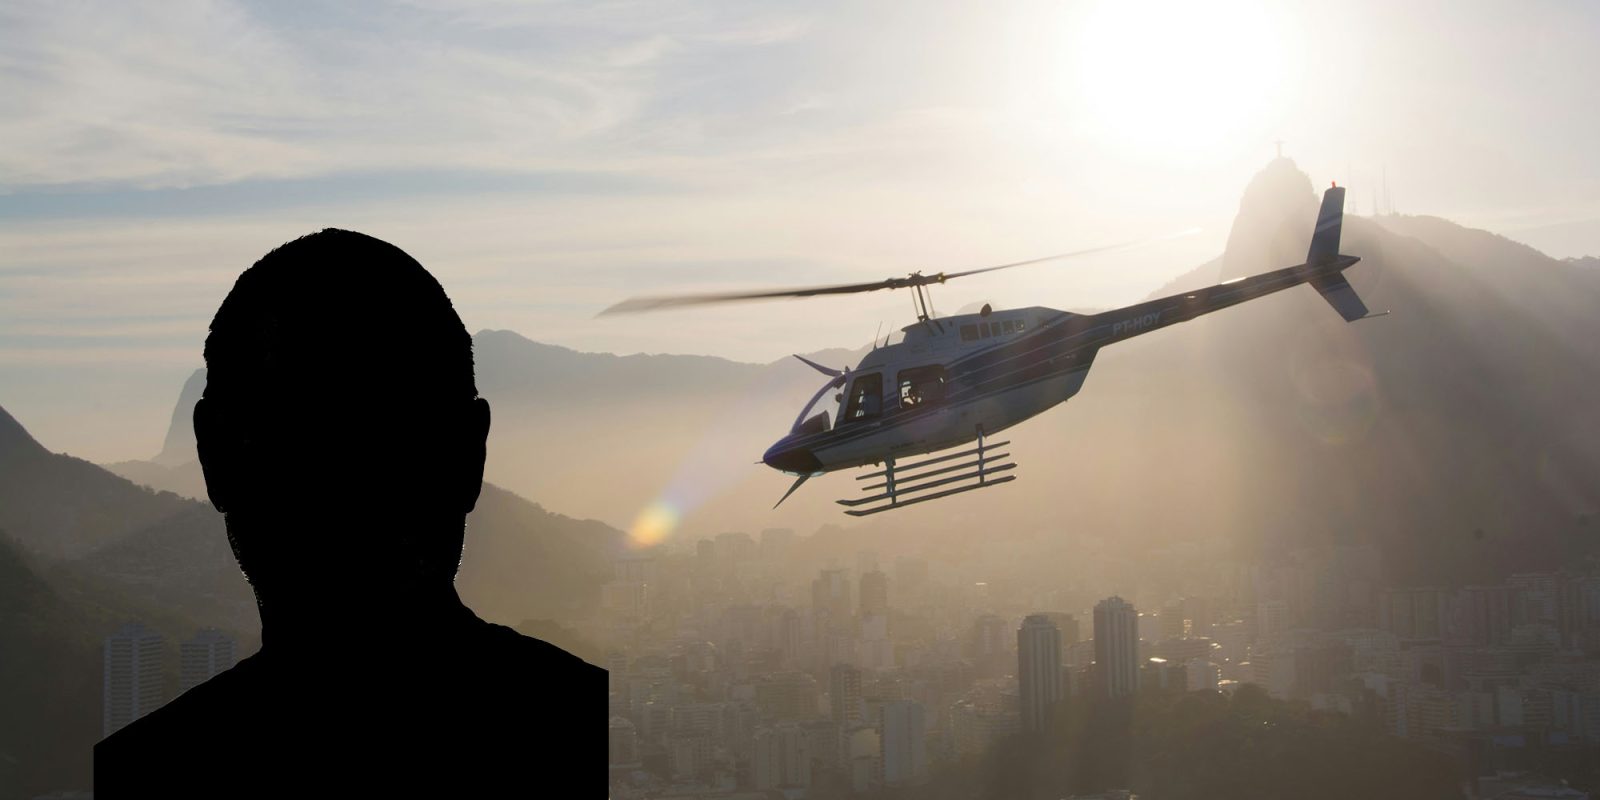 Not taking a photo of Steve Jobs | Helicopter with Steve Jobs silhouette